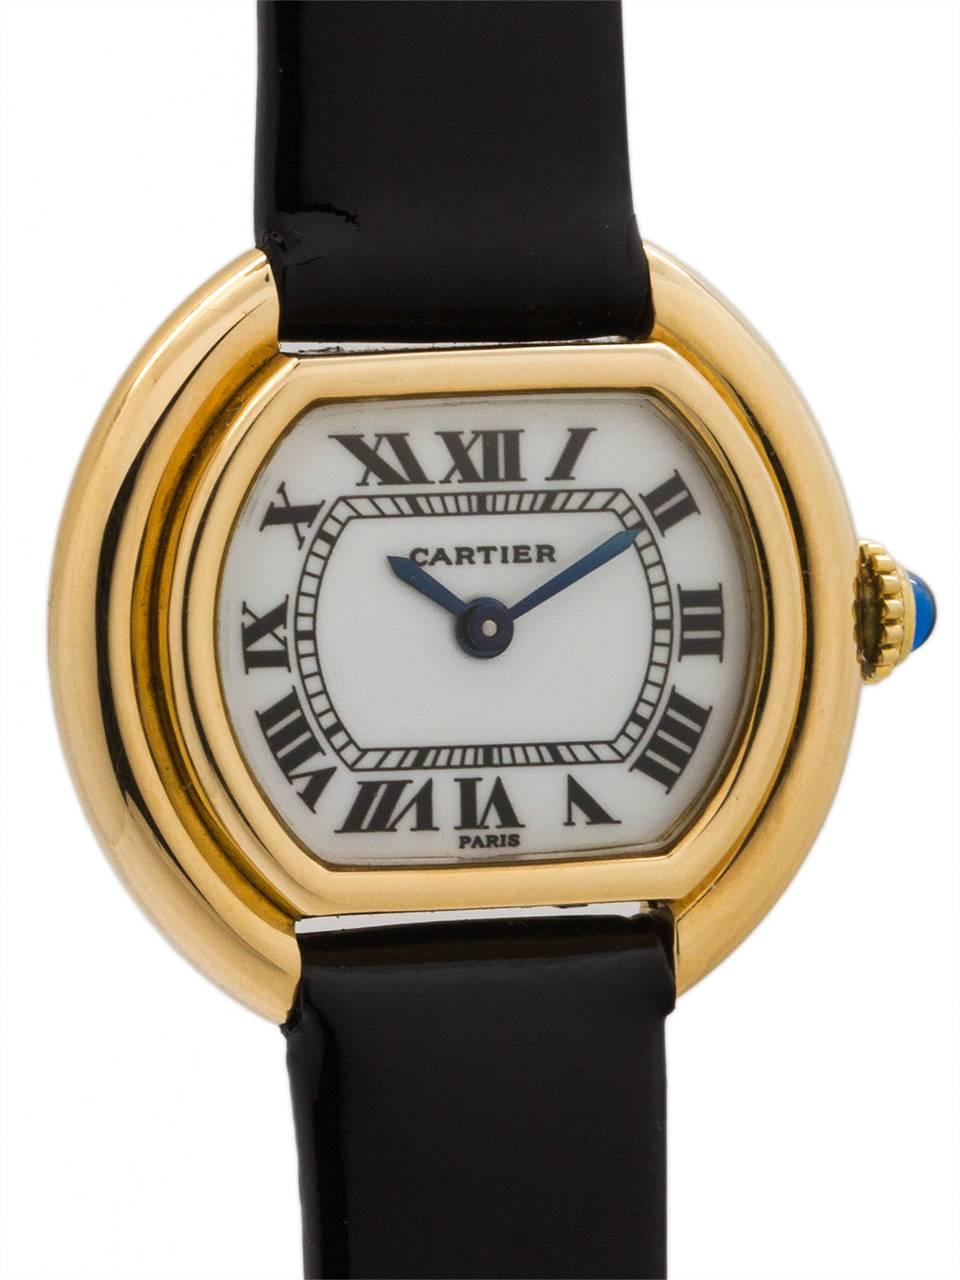 
Cartier 18K YG lady Vendome model, 24mm x 26mm, circa 1970’s. Scarce and great looking tonneau shaped case with stepped and grooved sides. With mineral glass crystal and rare white “baked” enamel classic Cartier dial with Roman figures and blued